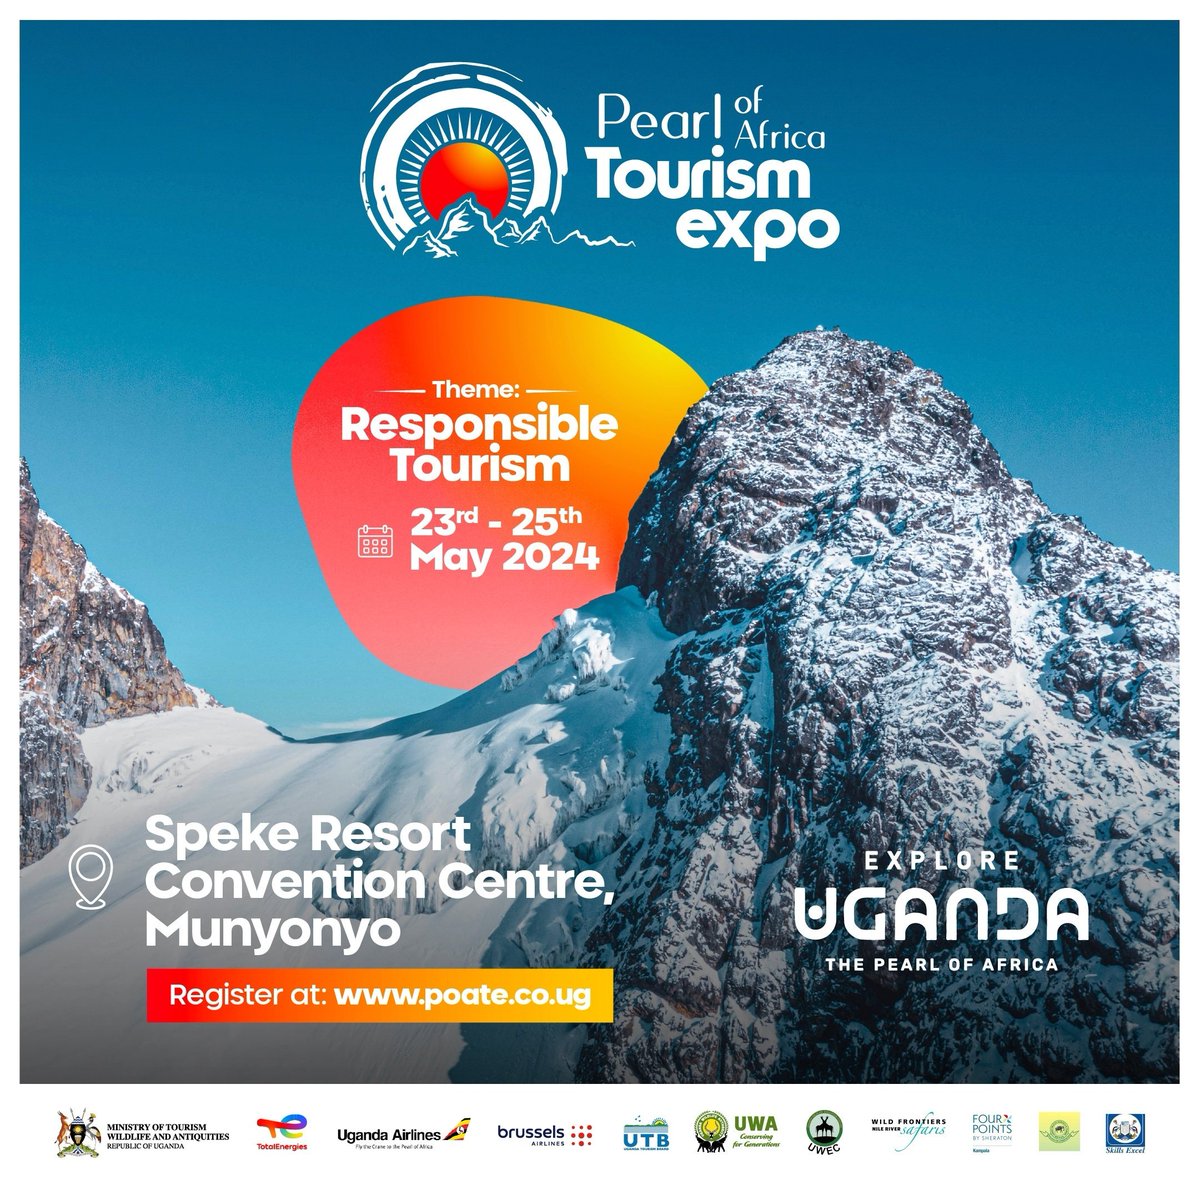 Only 15 days until the biggest Tourism Expo @POATE_UG at @spekeresort.